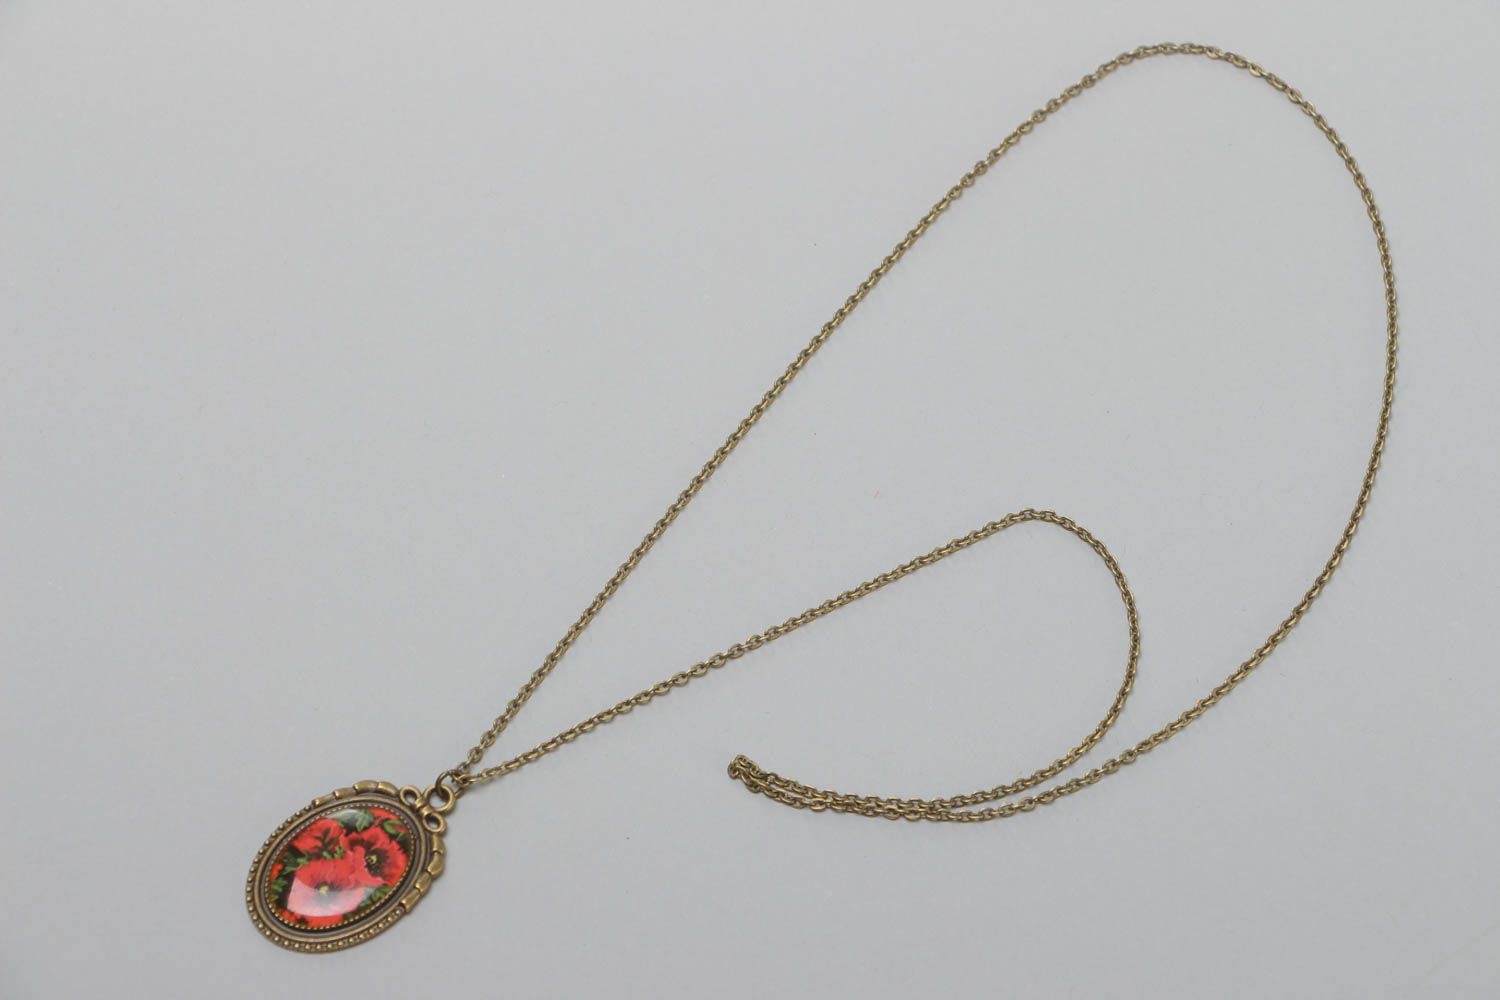 Handmade metal vintage neck pendant with glass glaze and metal chain Red Poppies photo 2